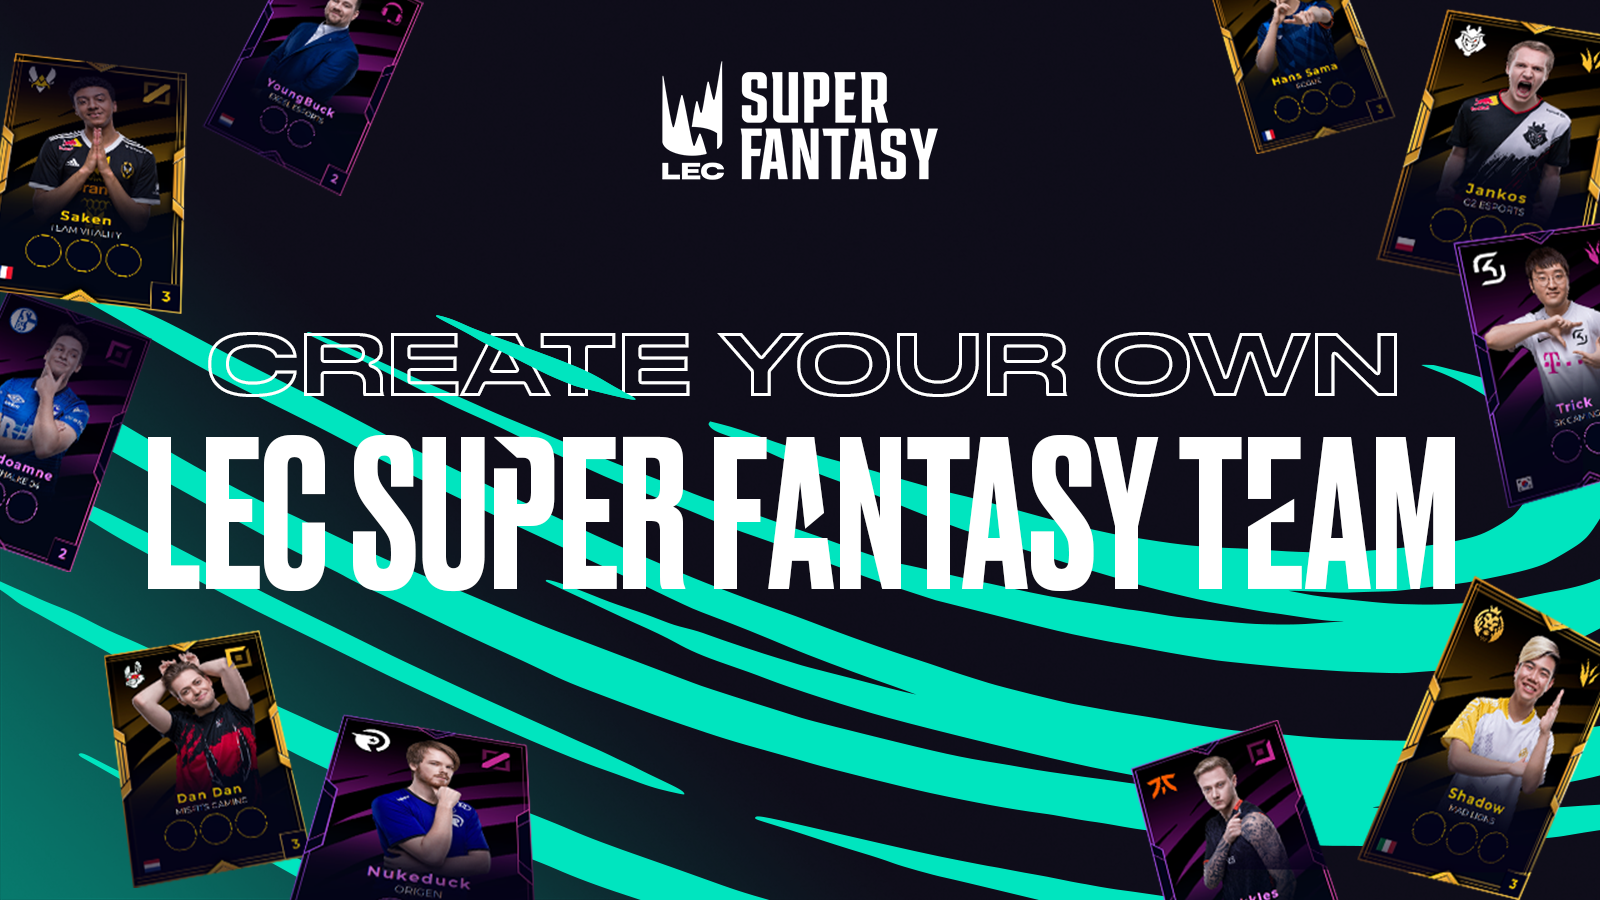 It S Time To Draft Your Dream League Team With Lec Superfantasy Esports Royalbeats In - superdata june 2017 roblox gtav and playerunknowns